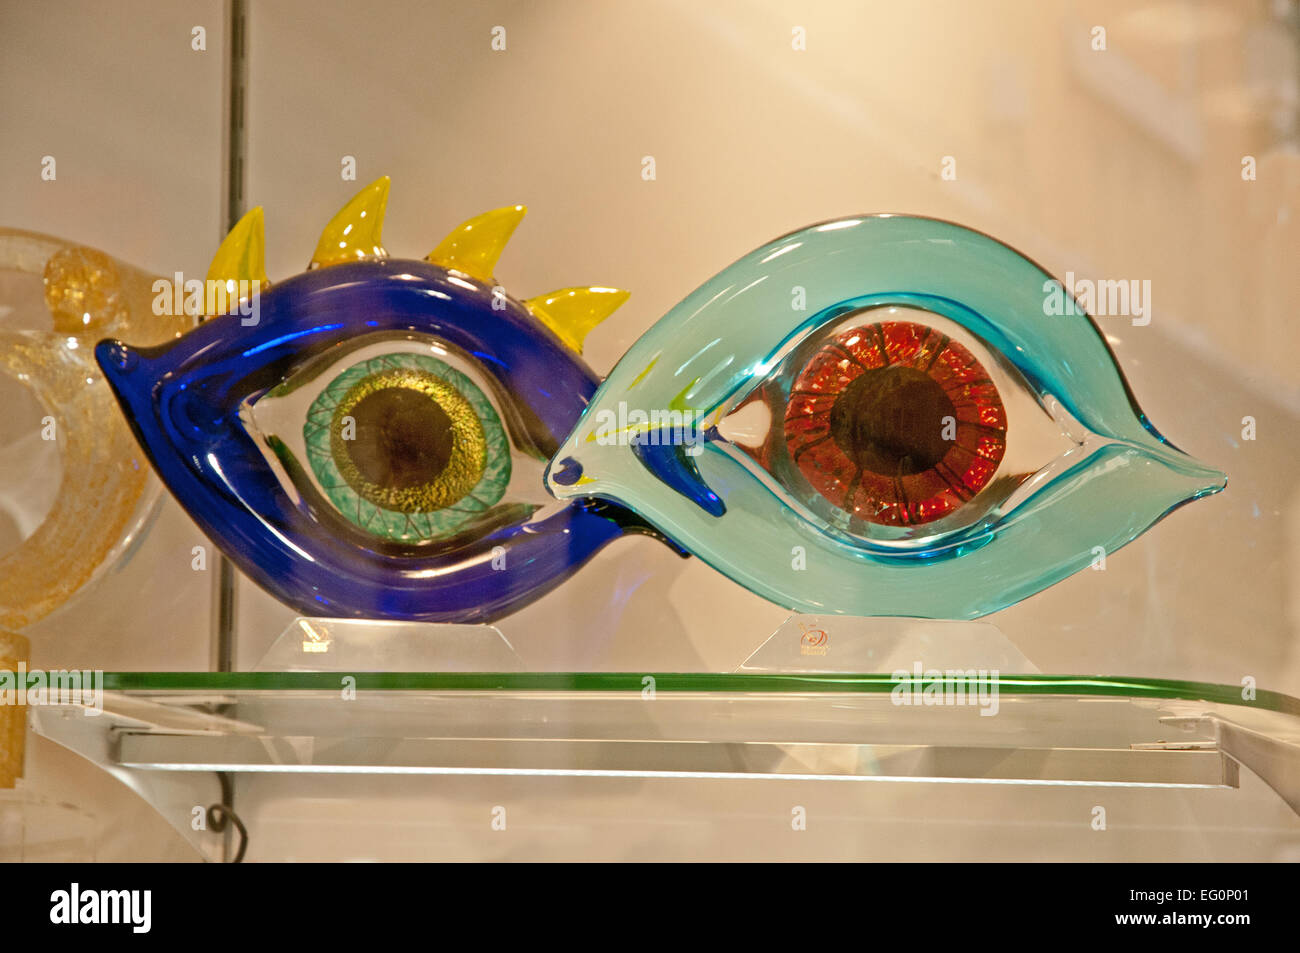 Example of Murano glass artwork  Depicting  EYES on sale in shop on Calle Lungha Venice Italy  MURANO GLASS WORK ART VENICE ITAL Stock Photo